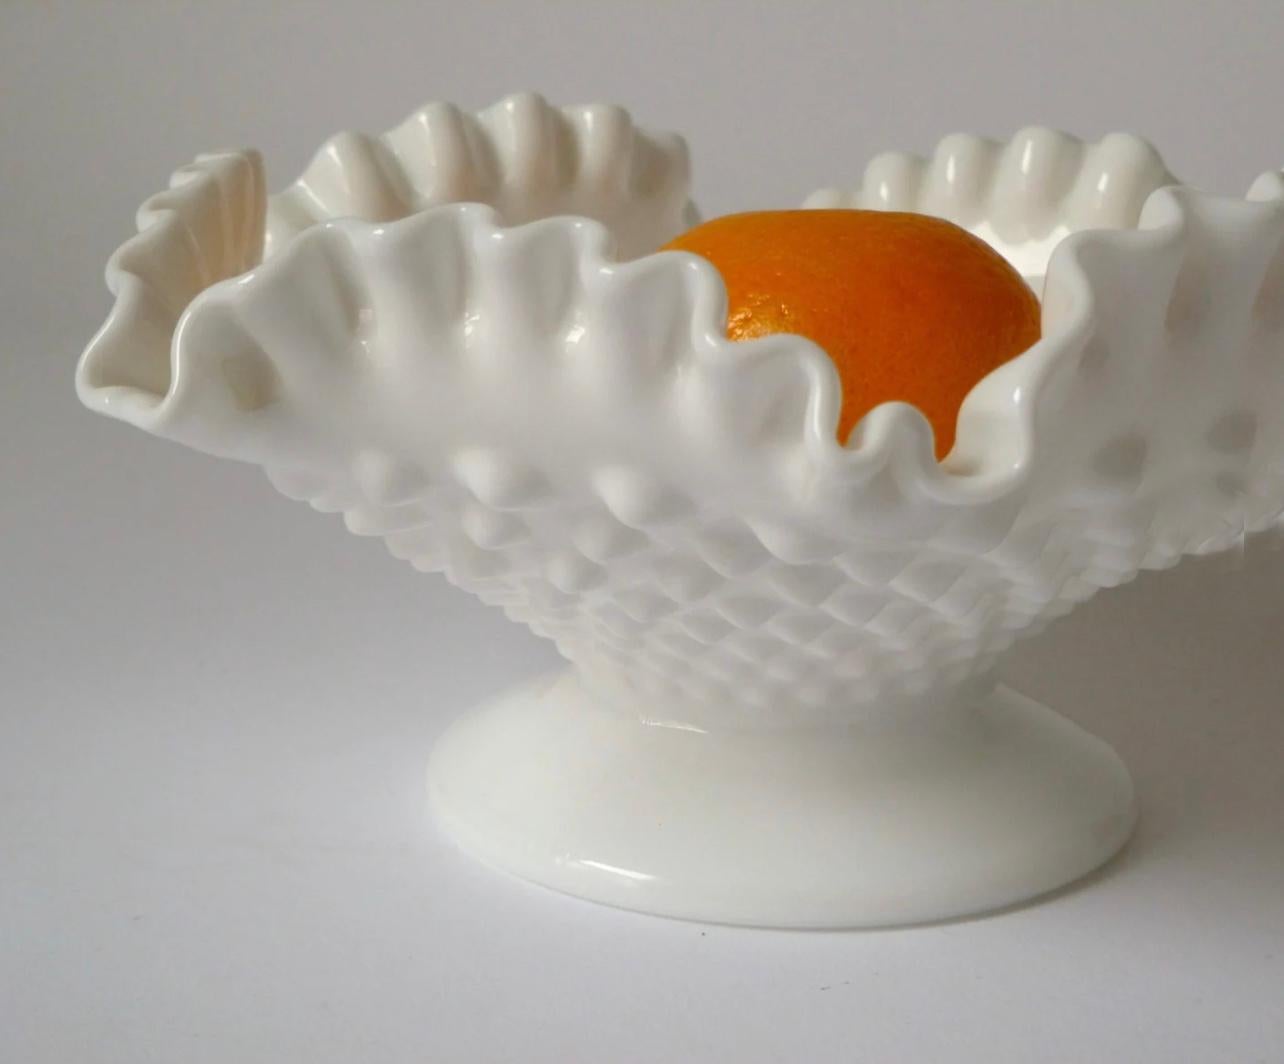 Handsome milk glass bowl stands on a short pedestal foot and is decorated with a hobnail pattern on the bowl. Great ruffled edge. Unmarked, but most likely made by Fenton, circa 1960.

Excellent vintage condition with no chips, cracks or